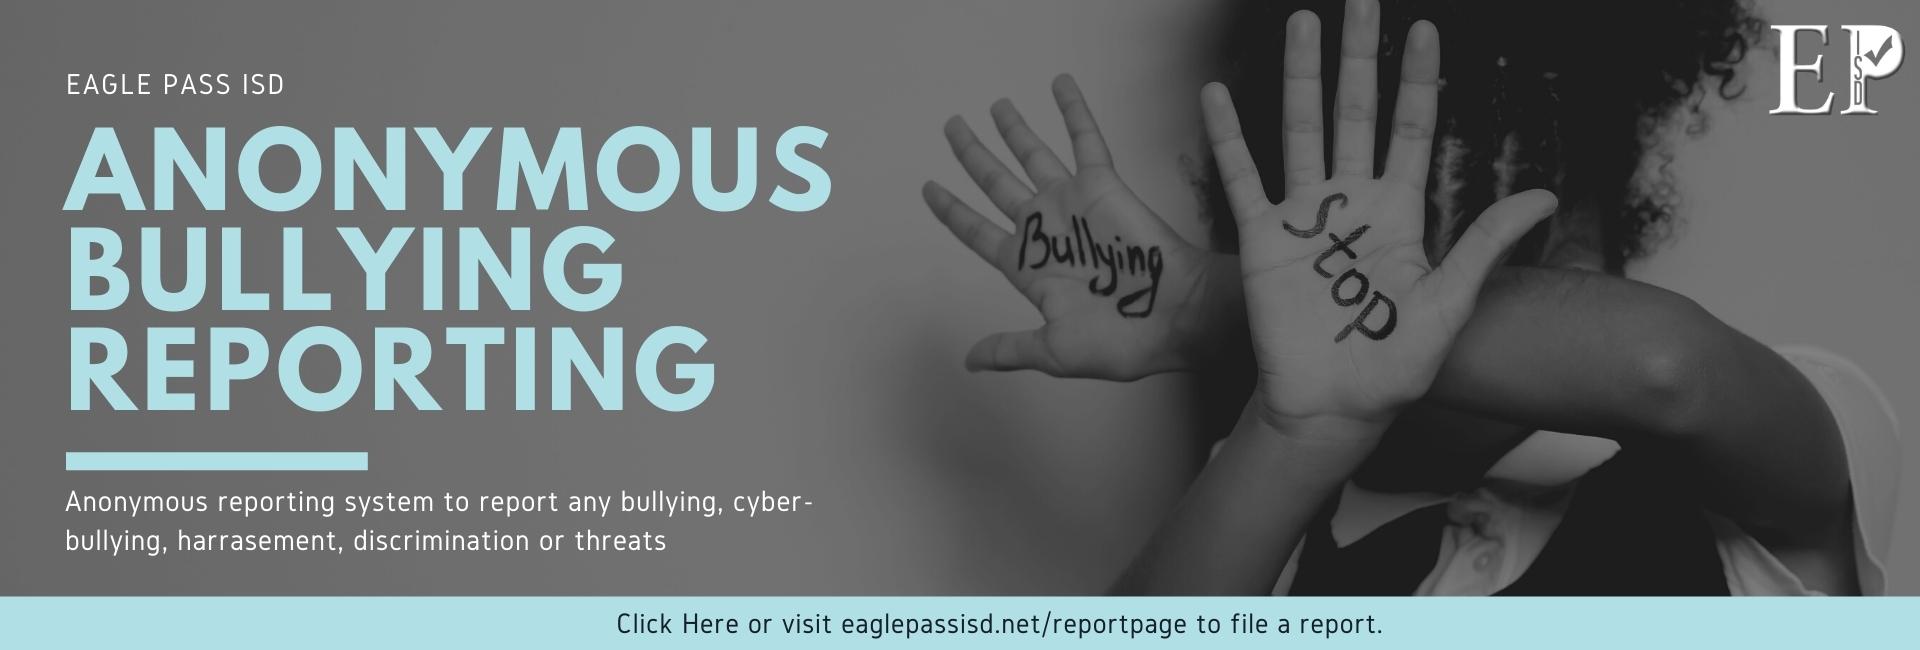 Anonymous bullying reporting banner